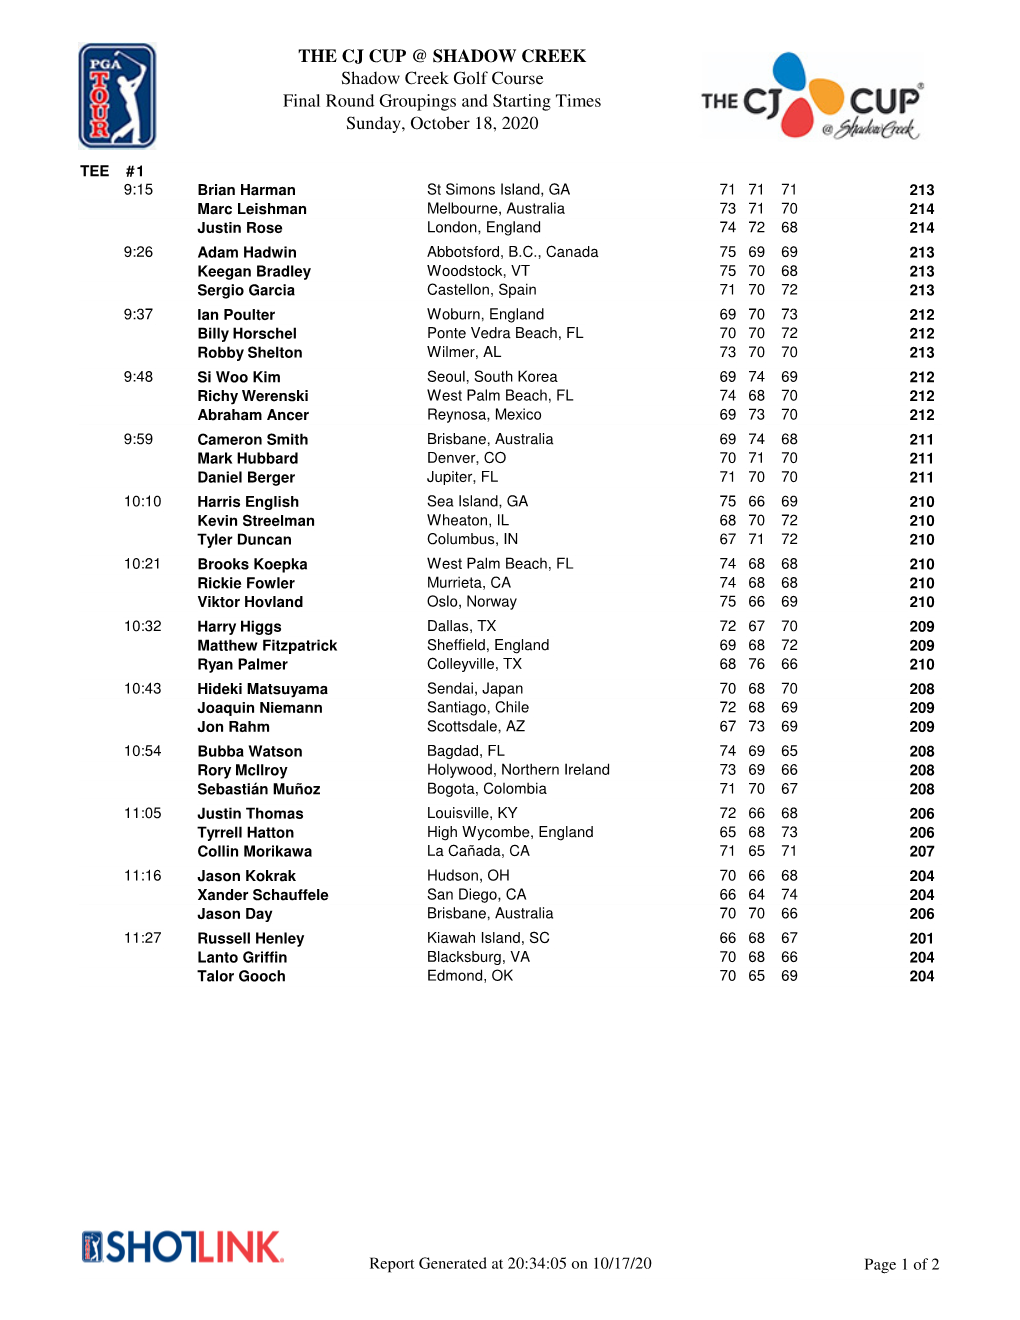 THE CJ CUP @ SHADOW CREEK Shadow Creek Golf Course Final Round Groupings and Starting Times Sunday, October 18, 2020